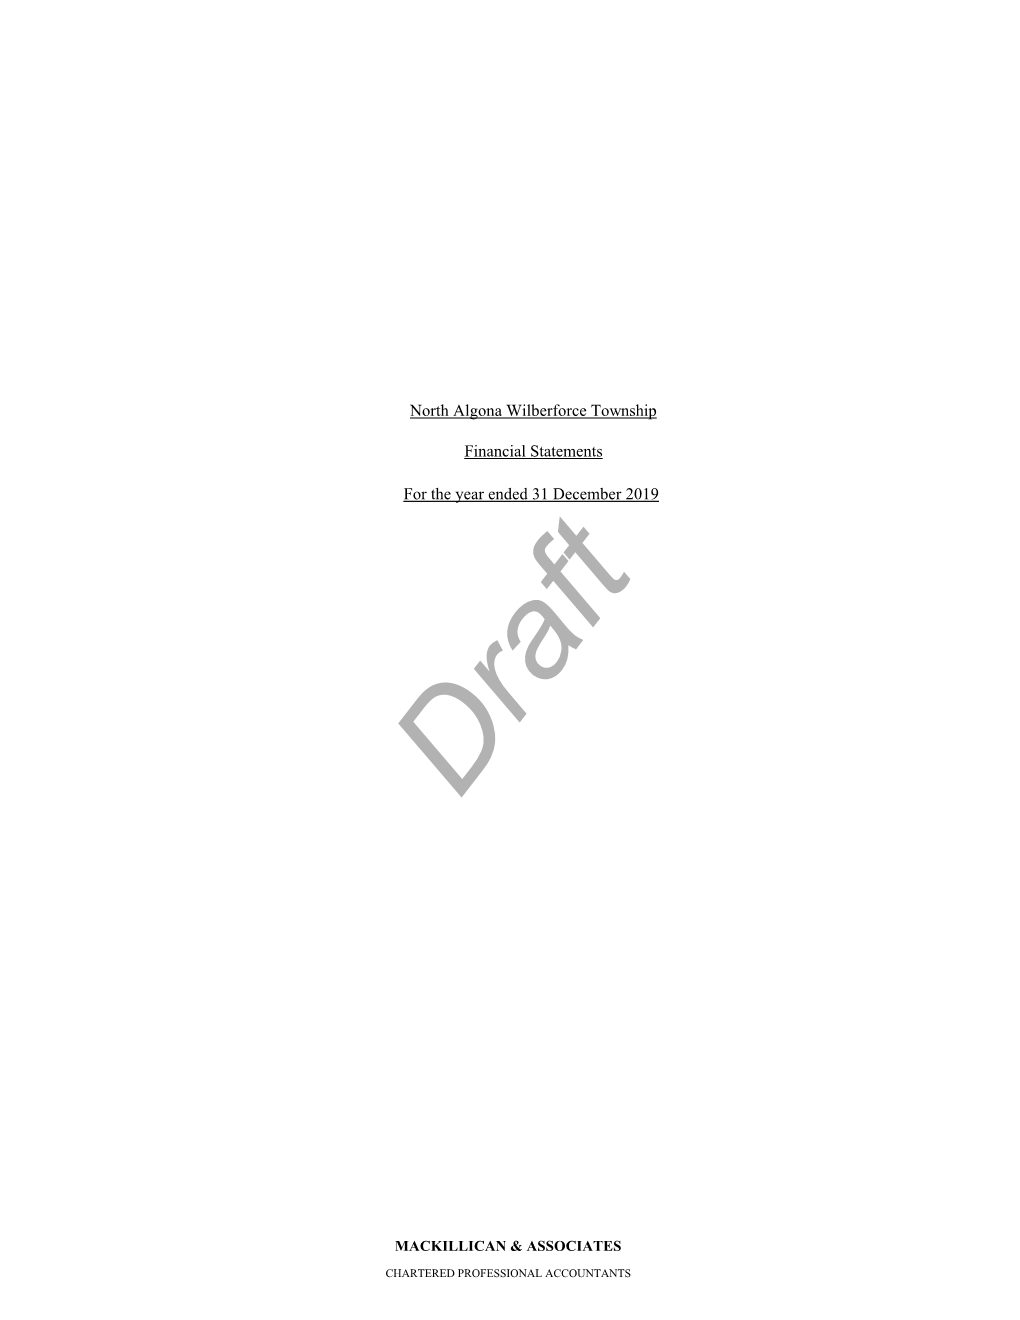 Township of North Algona Wilberforce – Draft Financial Statements 2019